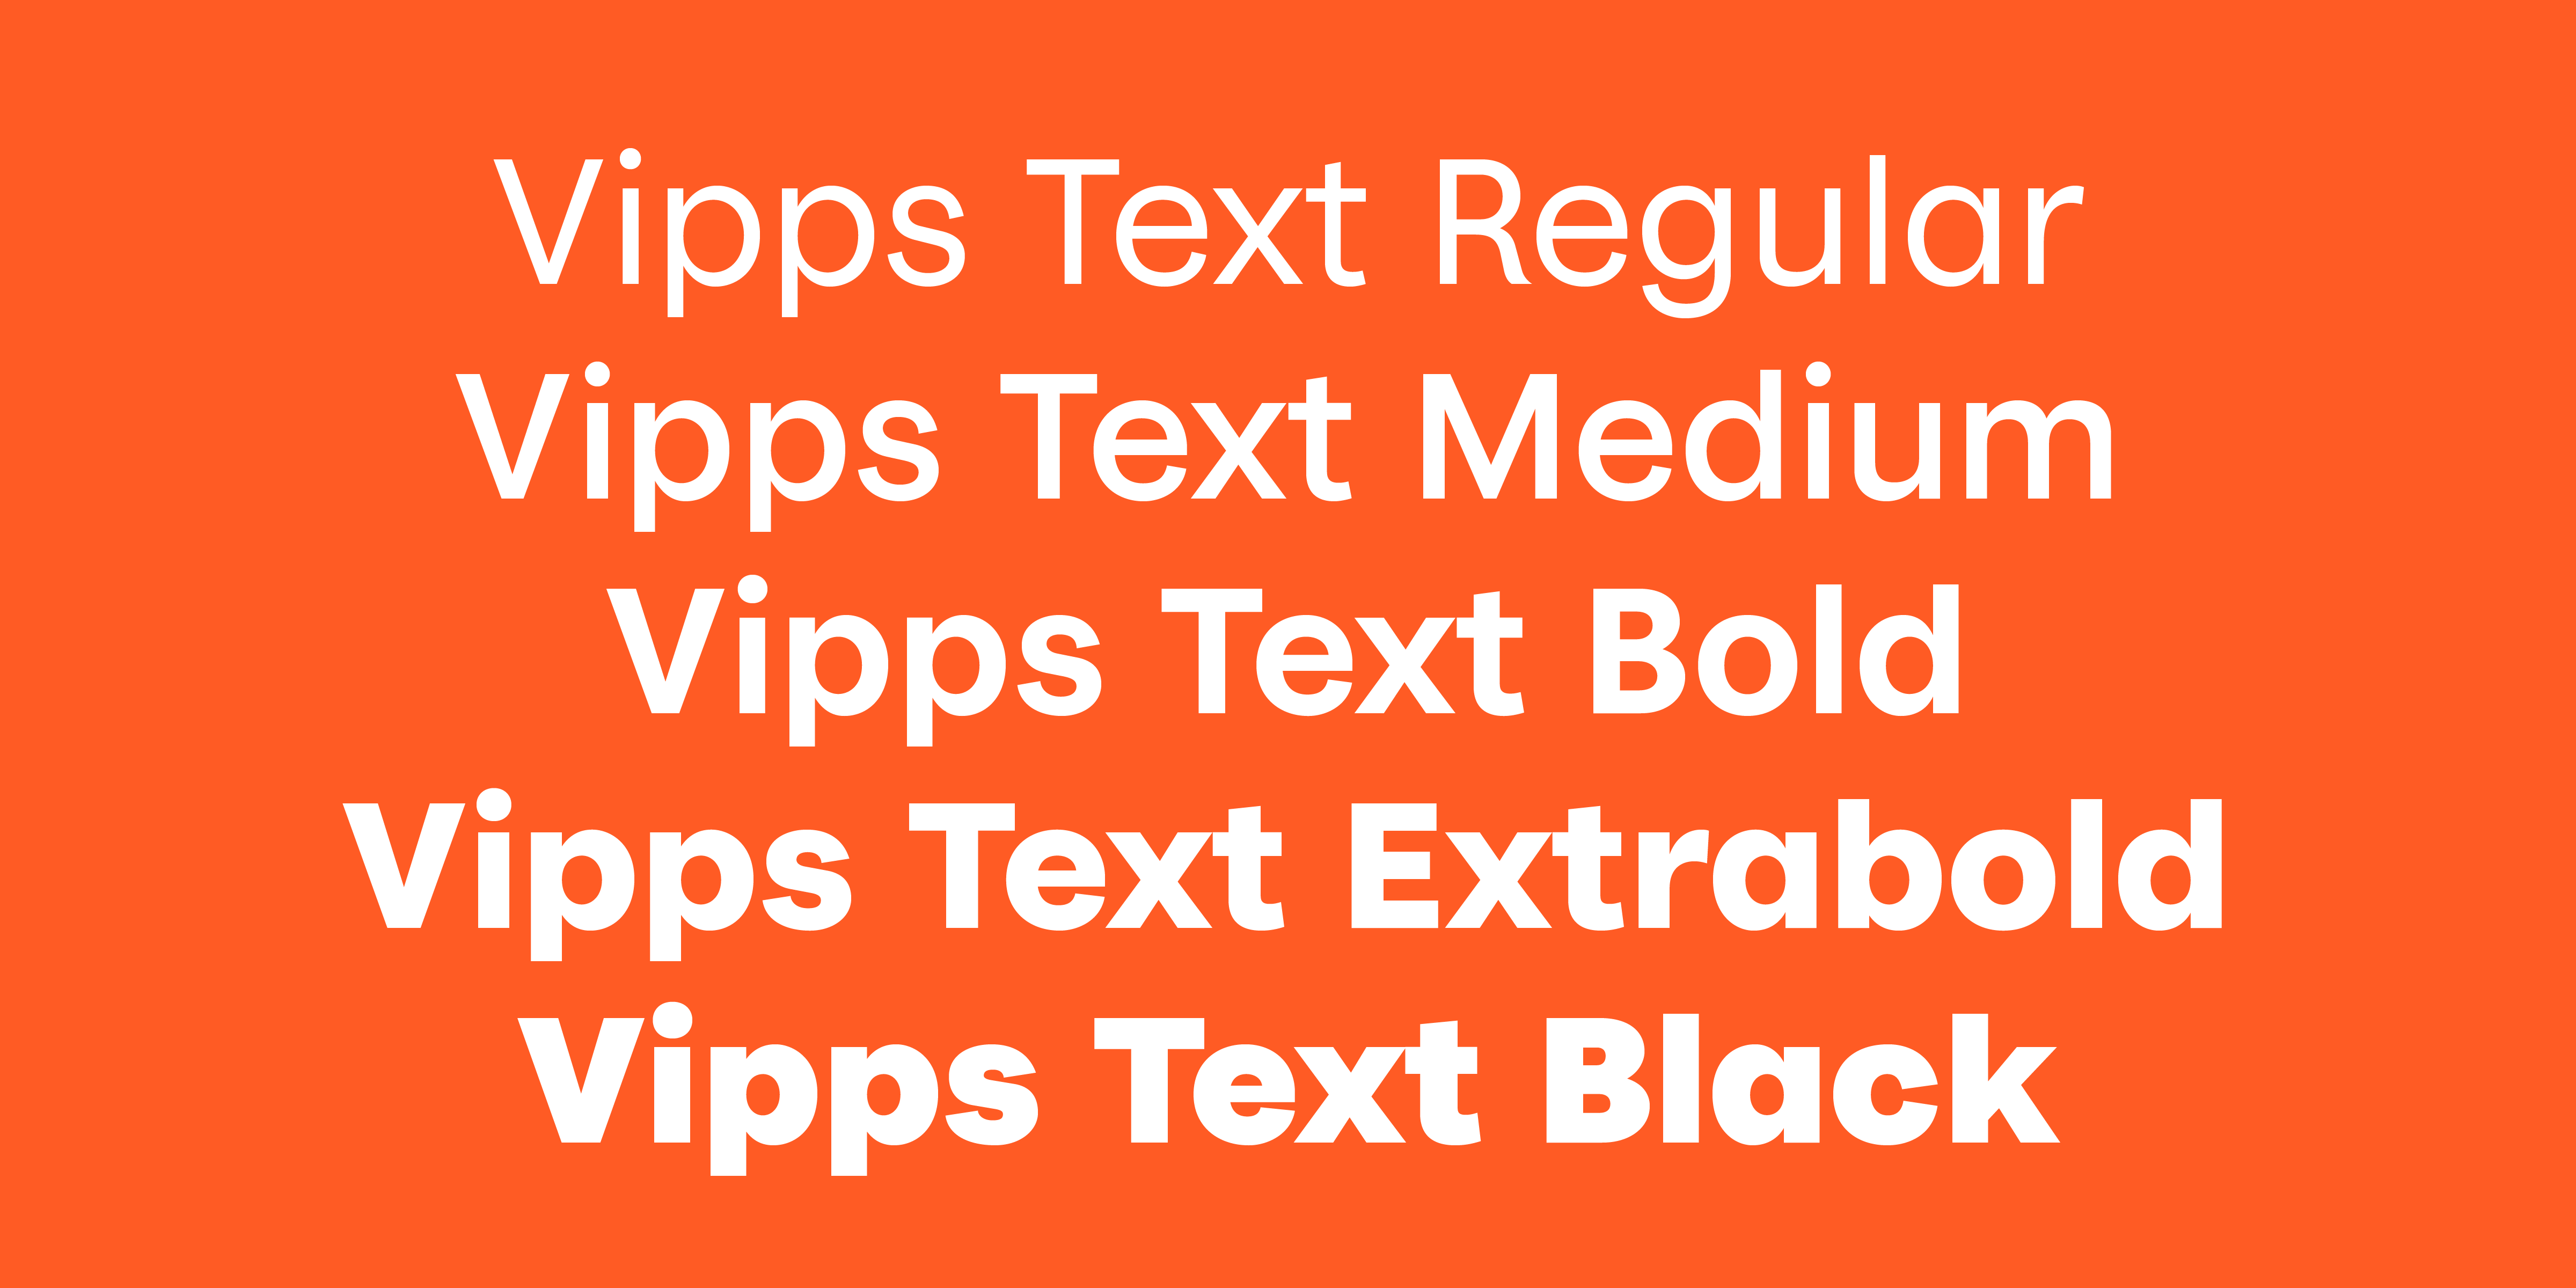 Vipps Text, a text- and interface-focused style that is a bit more even-keeled than the display style.